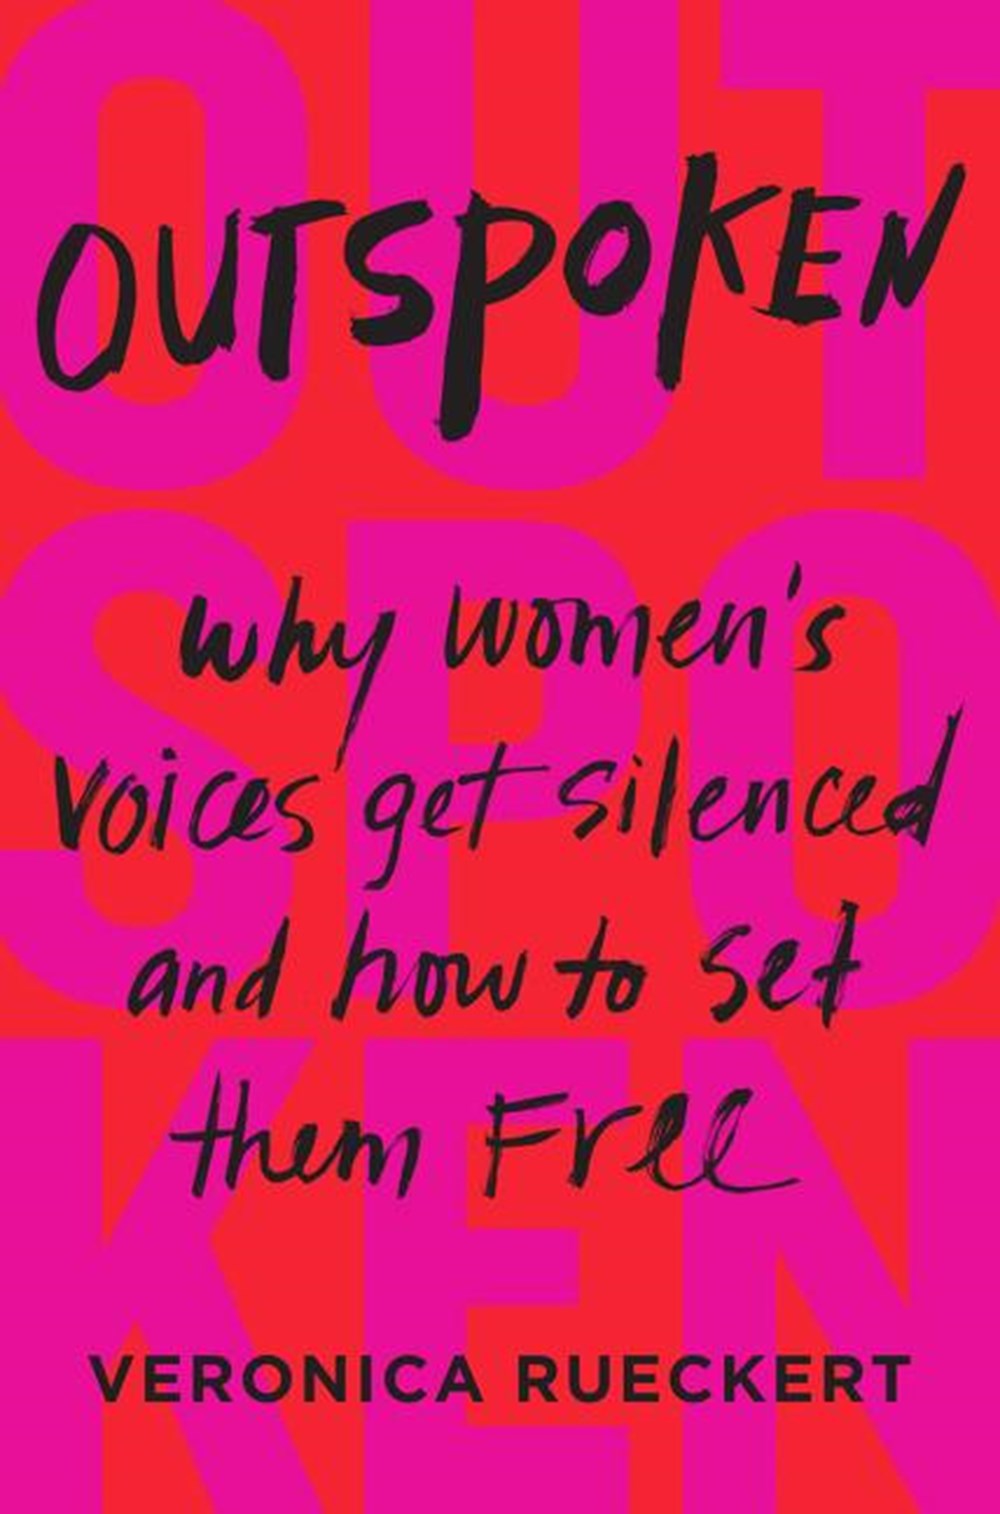 Outspoken: Why Women's Voices Get Silenced and How to Set Them Free